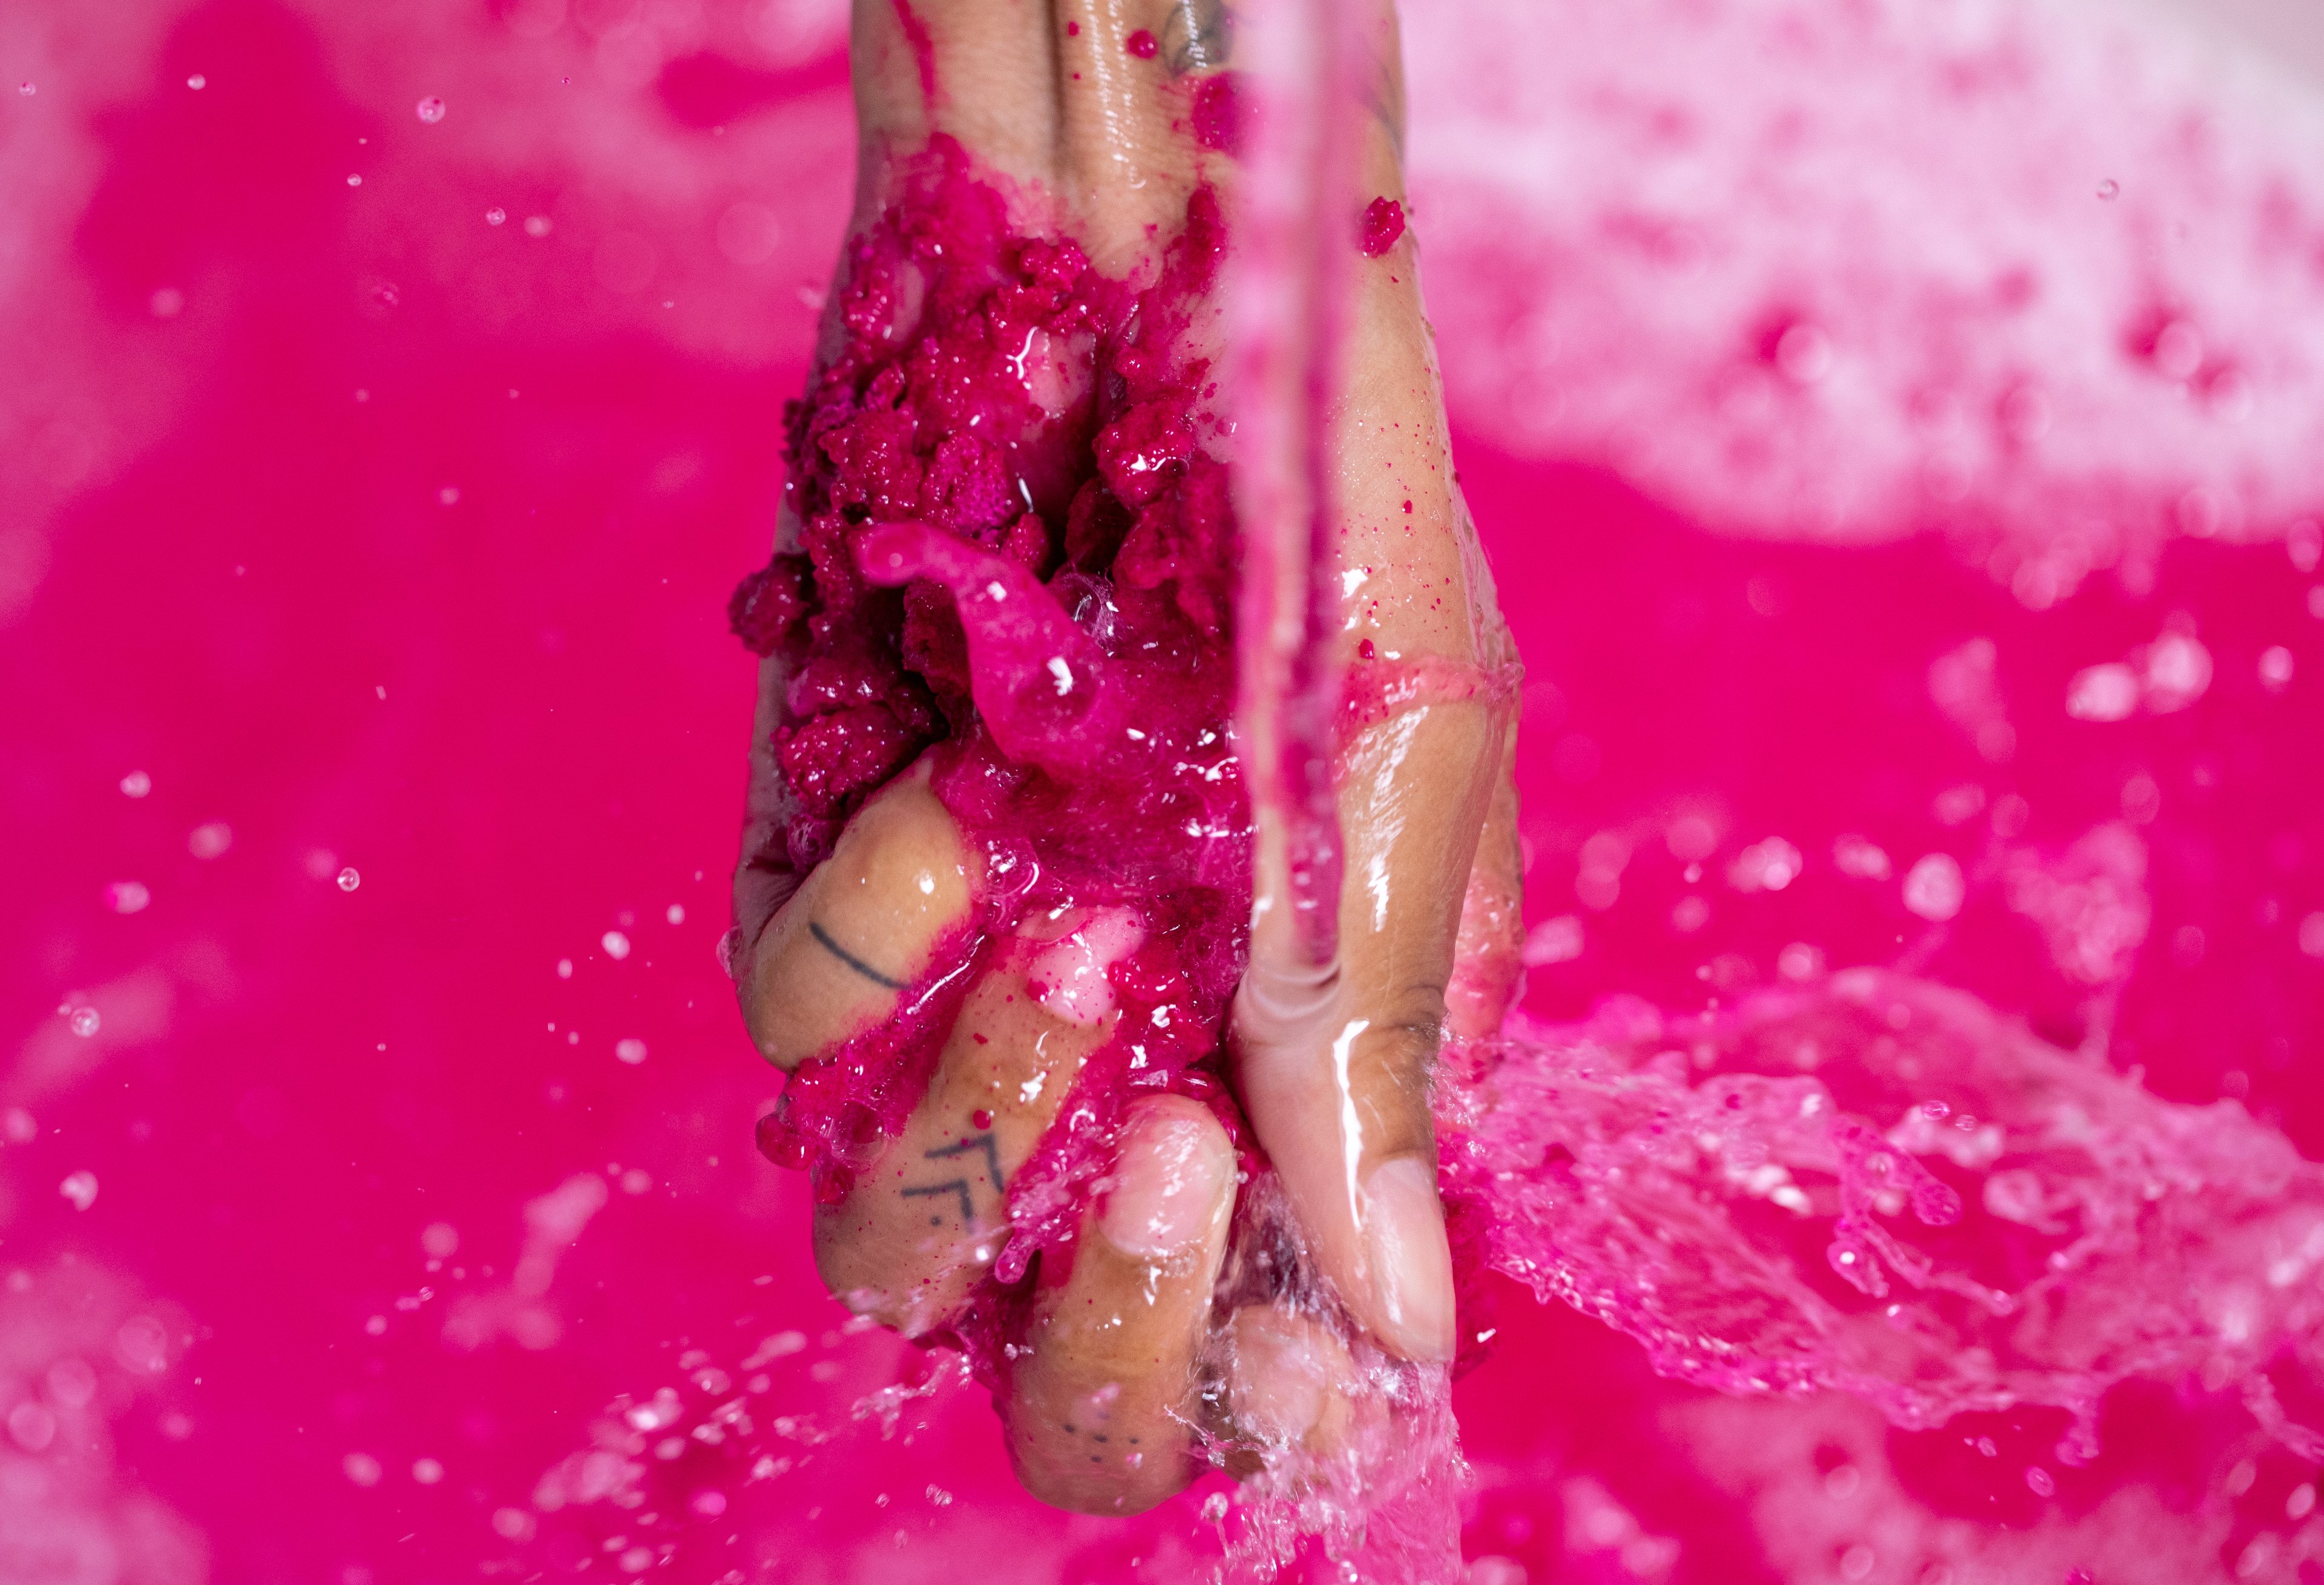 A hand crushes the bubble bar under running water, vivid pink water can be seen in the background.